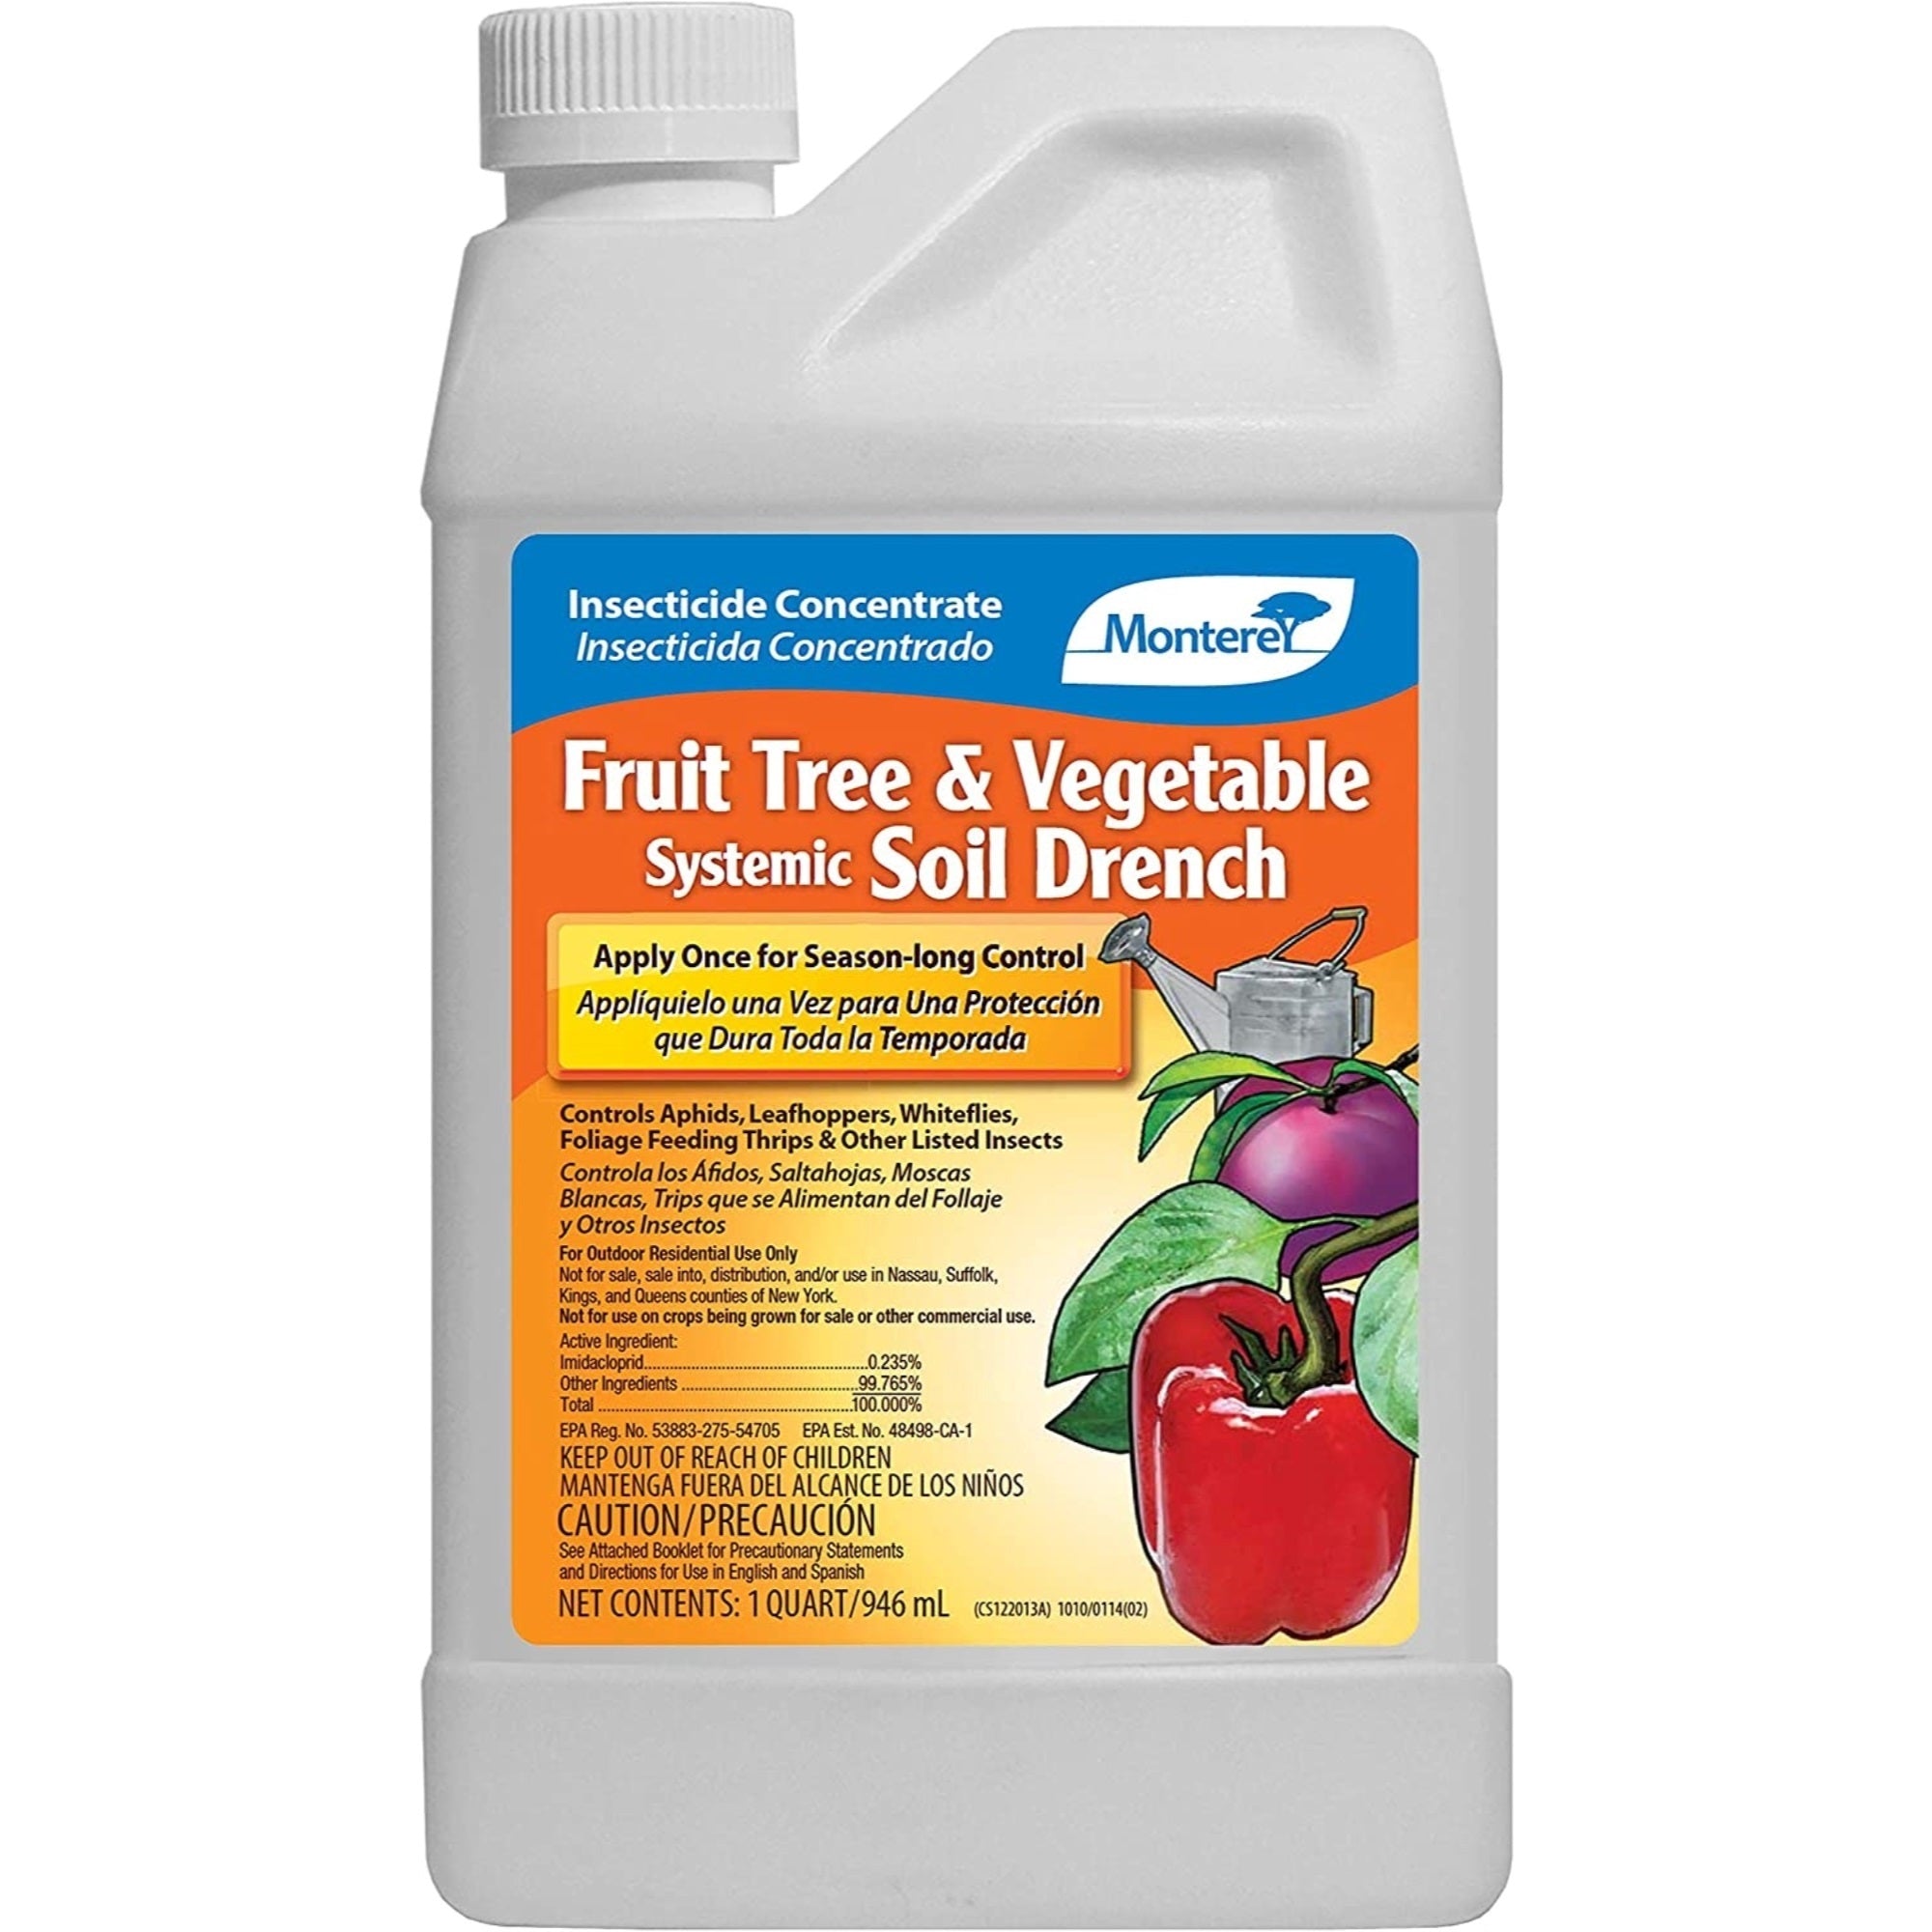 Monterey Fruit Tree & Vegetable Systemic Soil Drench Insecticide Concentrate, 32 Ounces